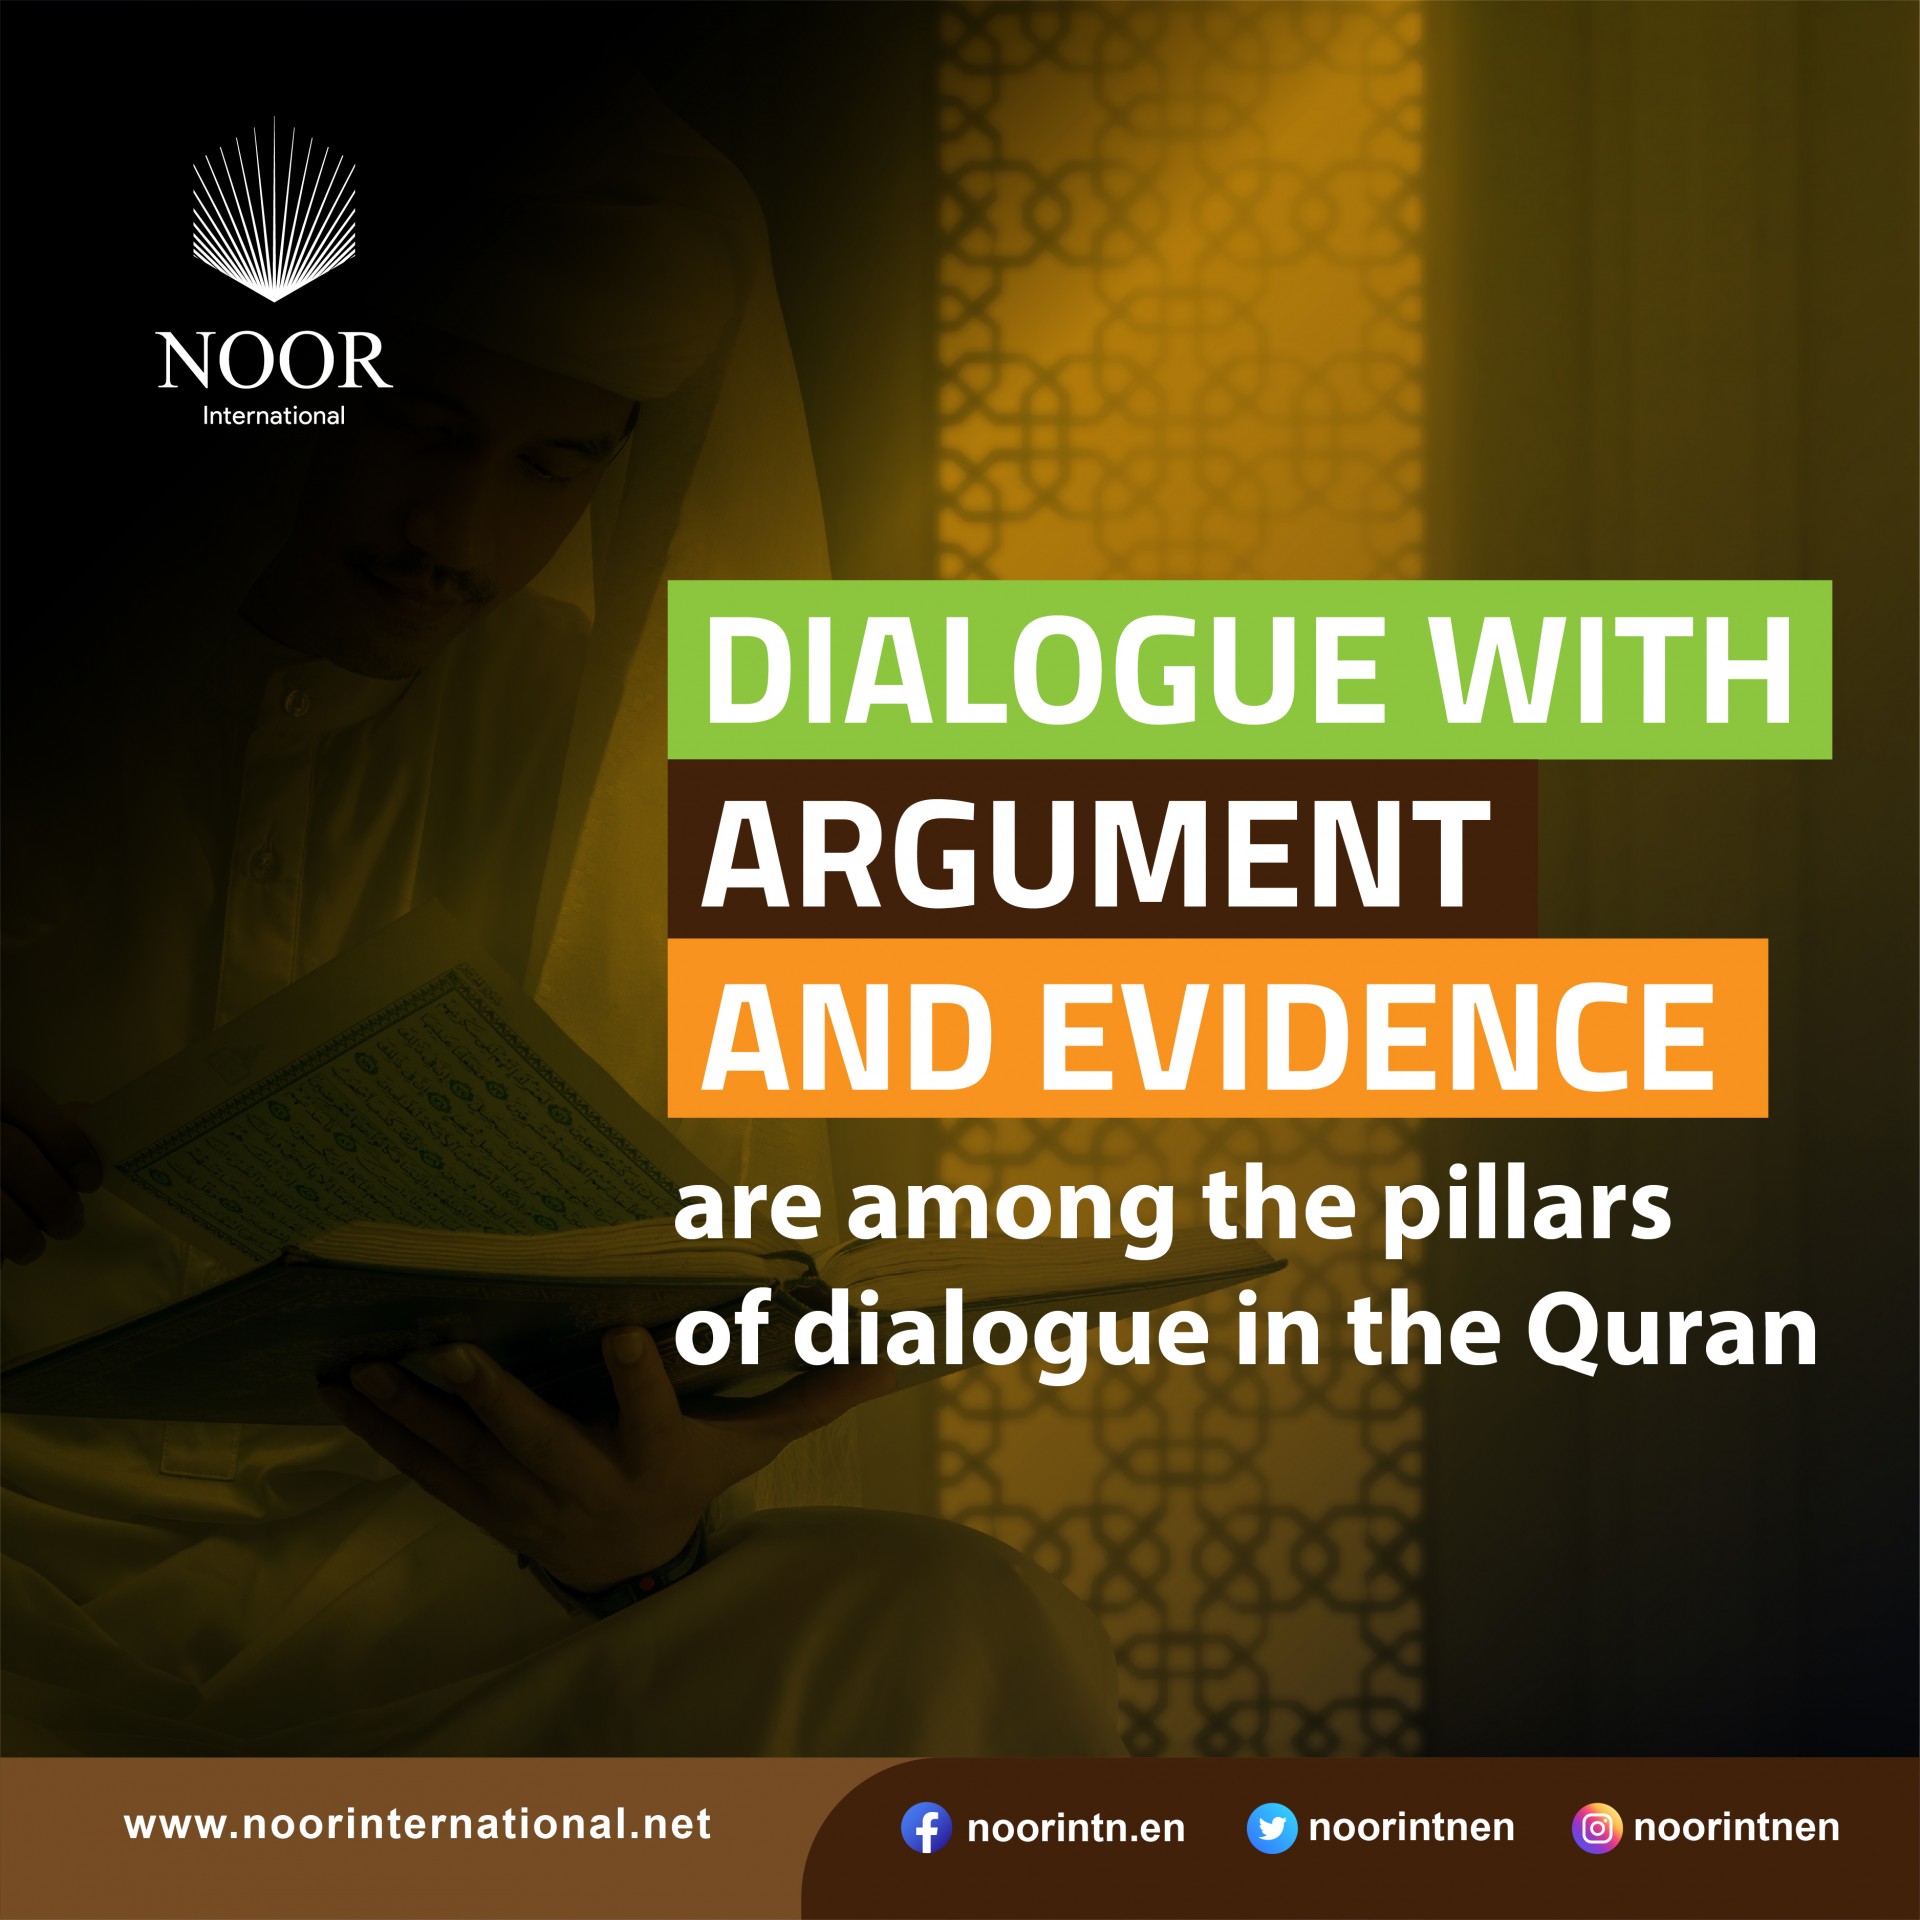 The culture of dialogue in the Quran